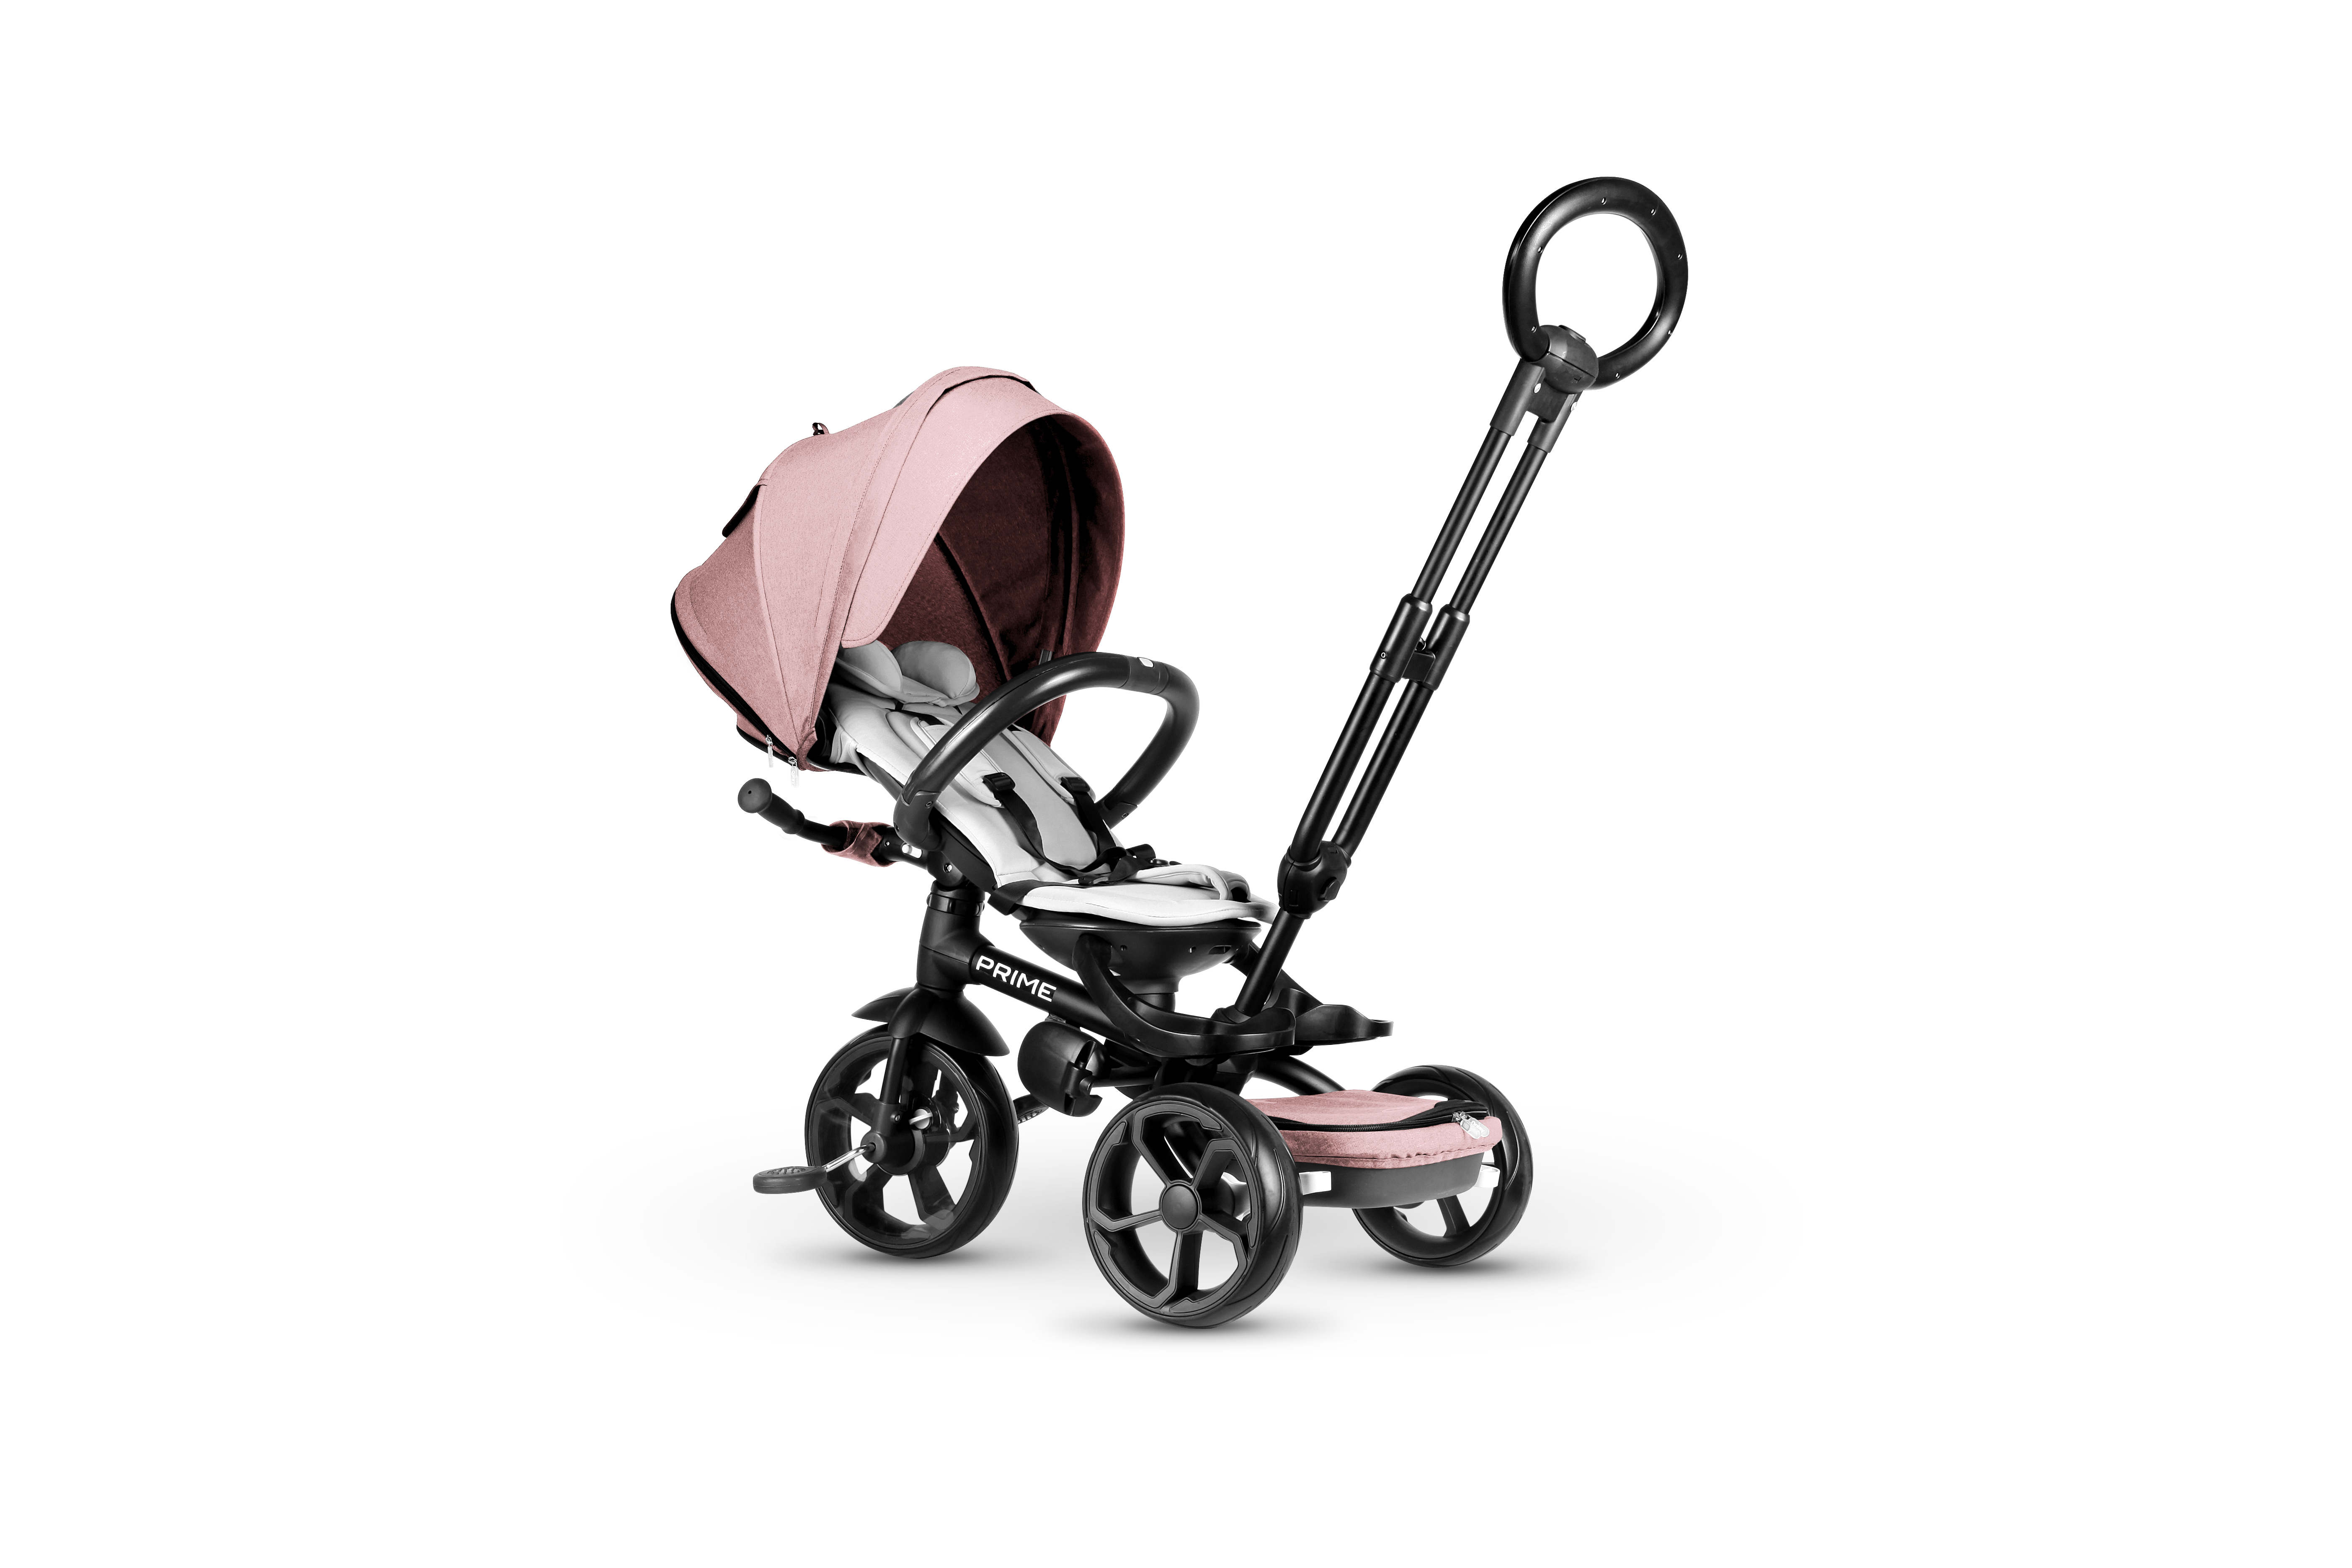 REAL BABY QP100001 TRICICLO PRIME ROSA 6 IN 1